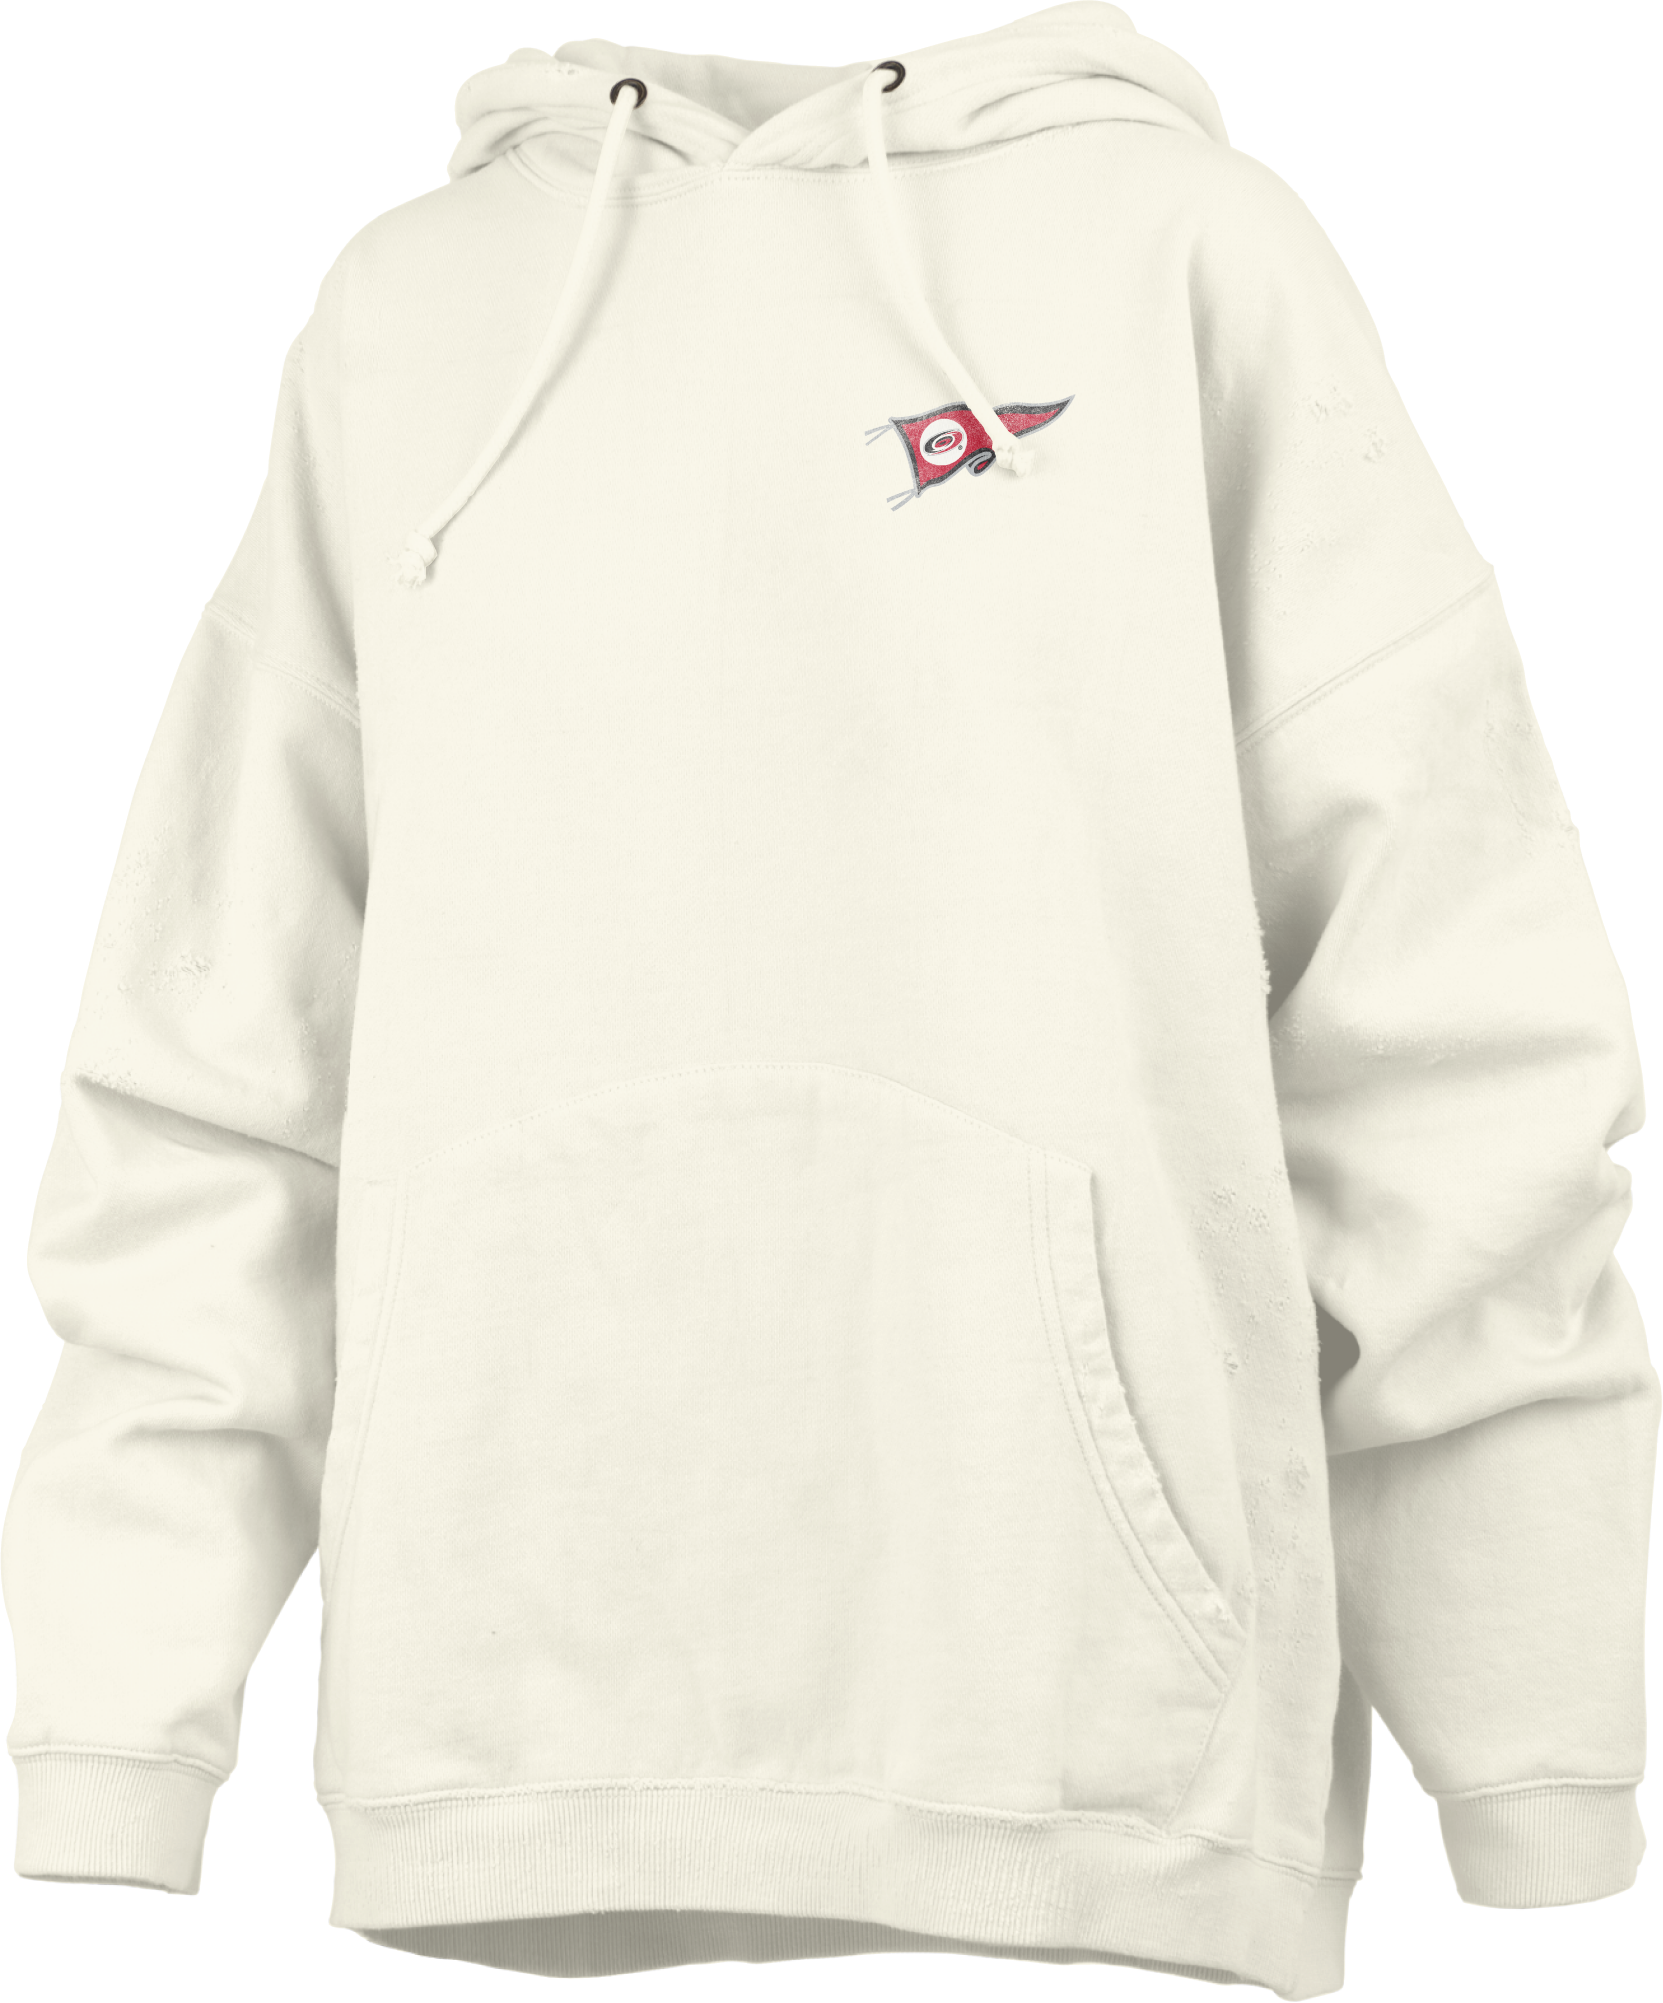 Front: Cream hoodie with Hurricanes pennant logo on left chest